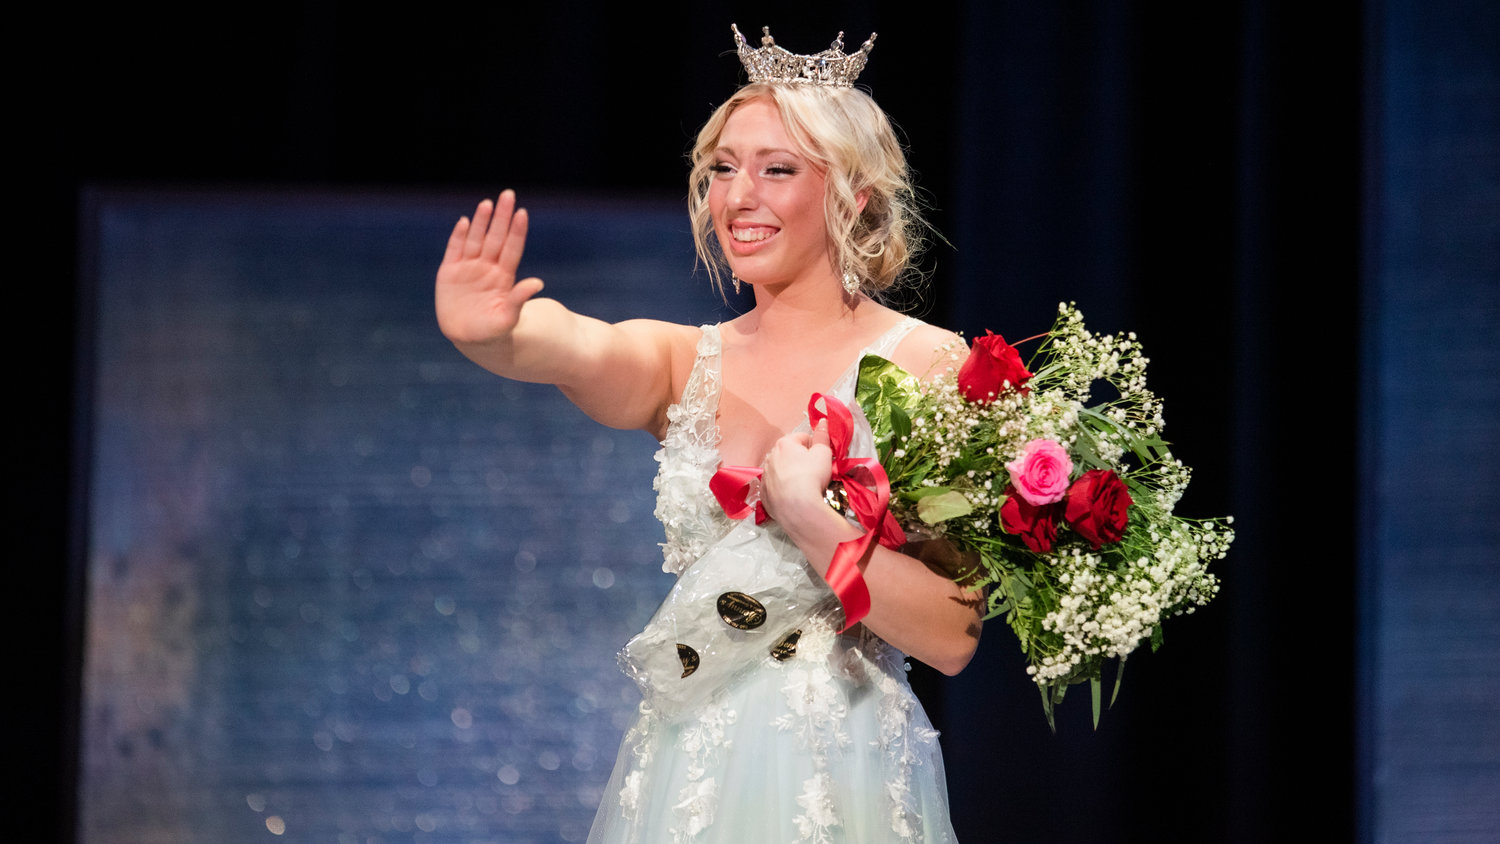 Miss Lewis County Sophie Moerke smiles and waves during an event held at Centralia High School Saturday night.